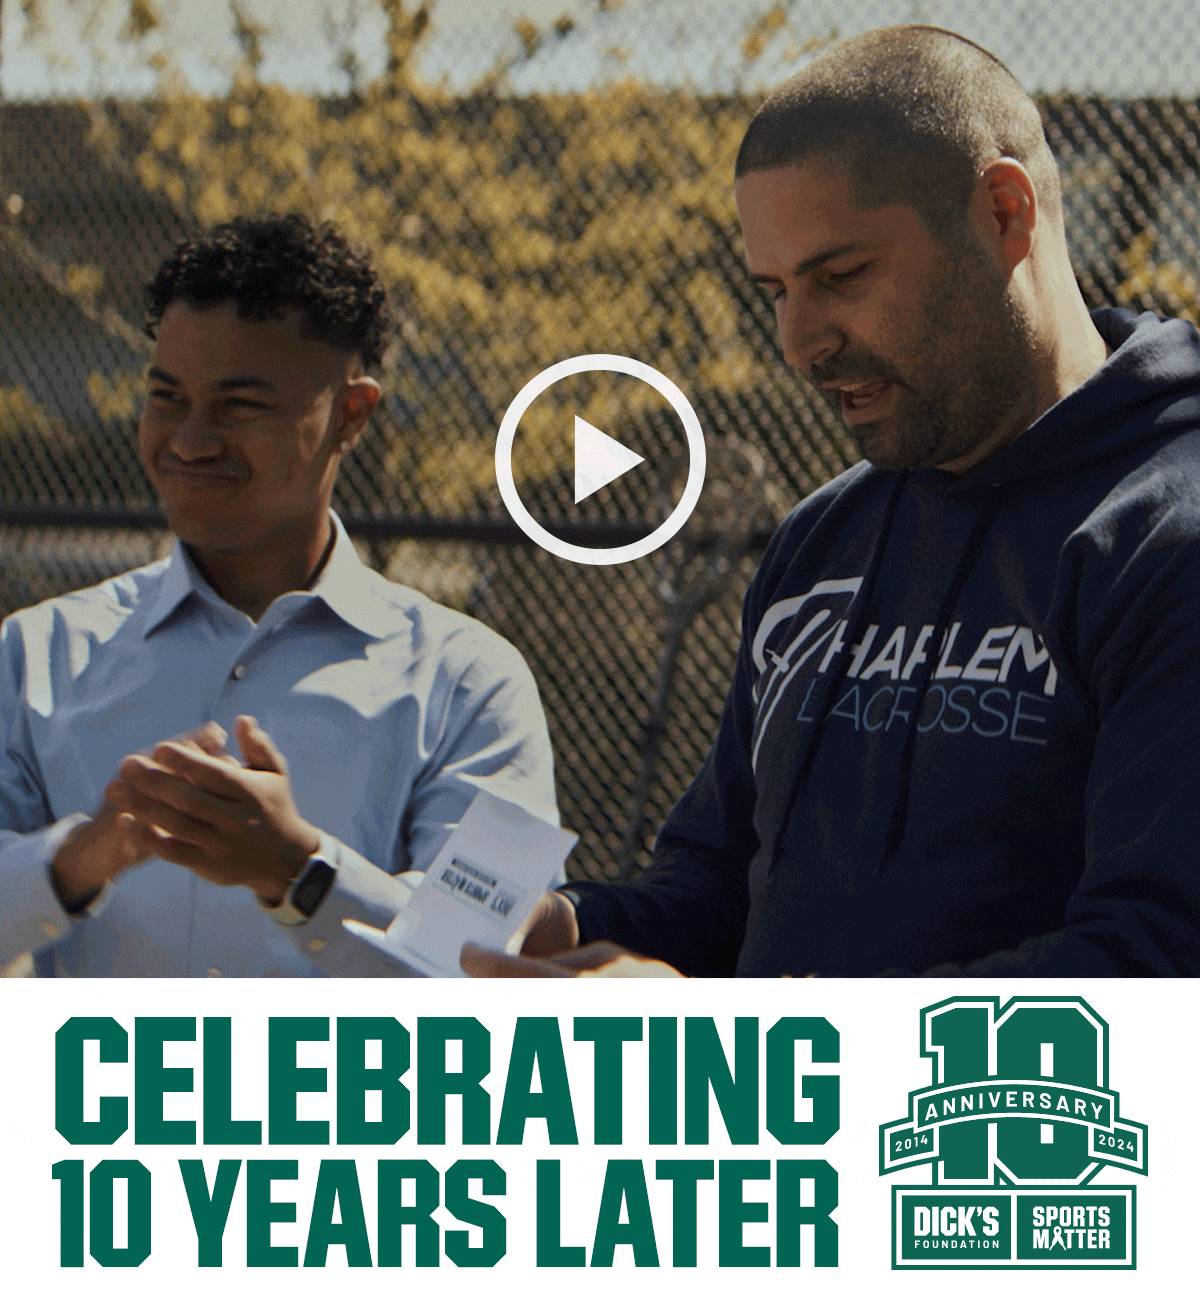  Dick's Foundation. Sports matter. 10 anniversary, 2014-2024. Celebrating 10 years later.